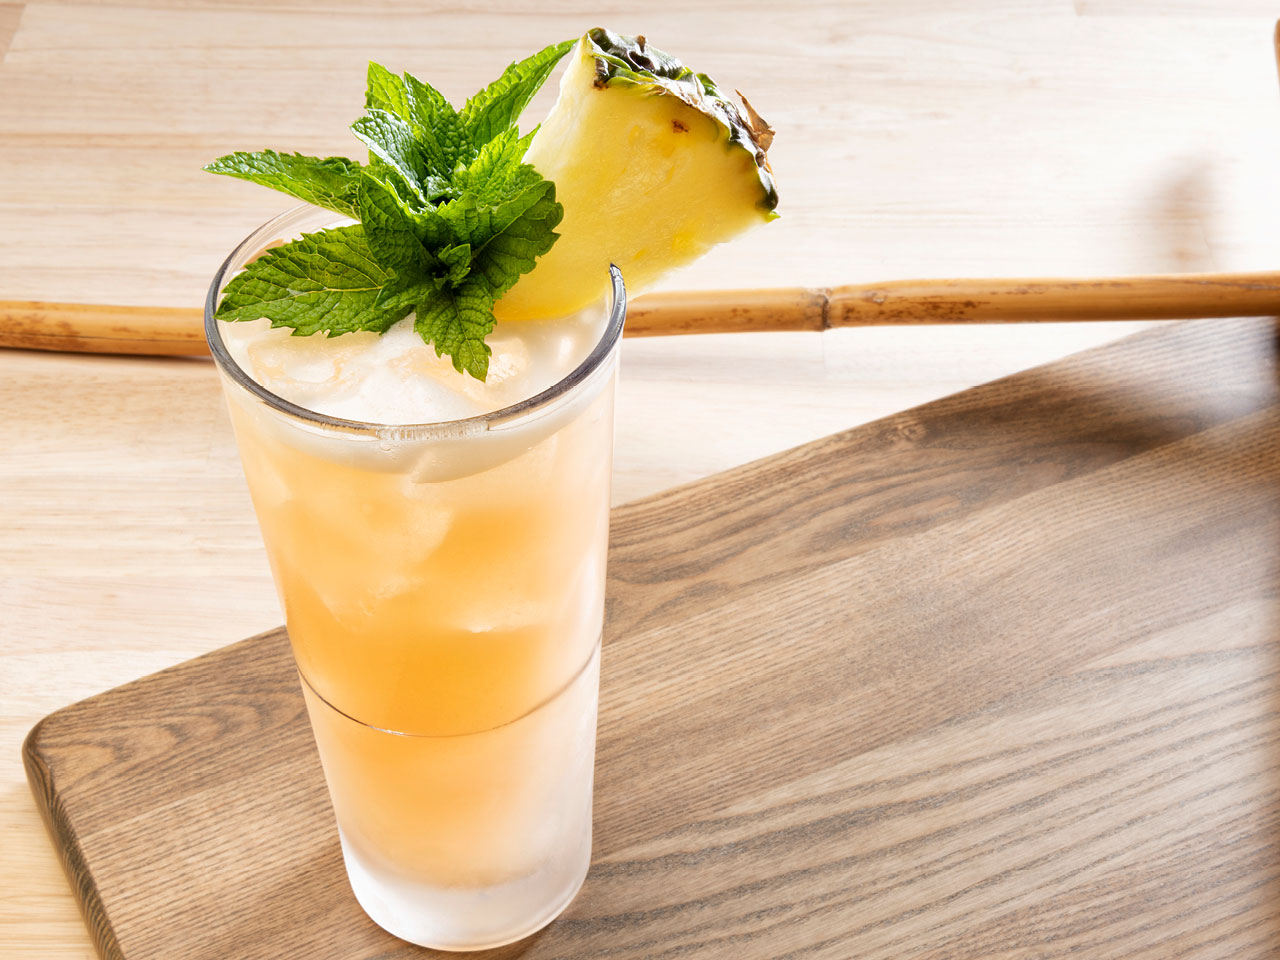 Bar Louie’s new featured Cocktail For A Cause, the Tropical Paradise Punch. Tito’s Handmade Vodka, Peach Liqueur, Guava, Pineapple, Lime, Fever Tree Ginger Beer, Mint.